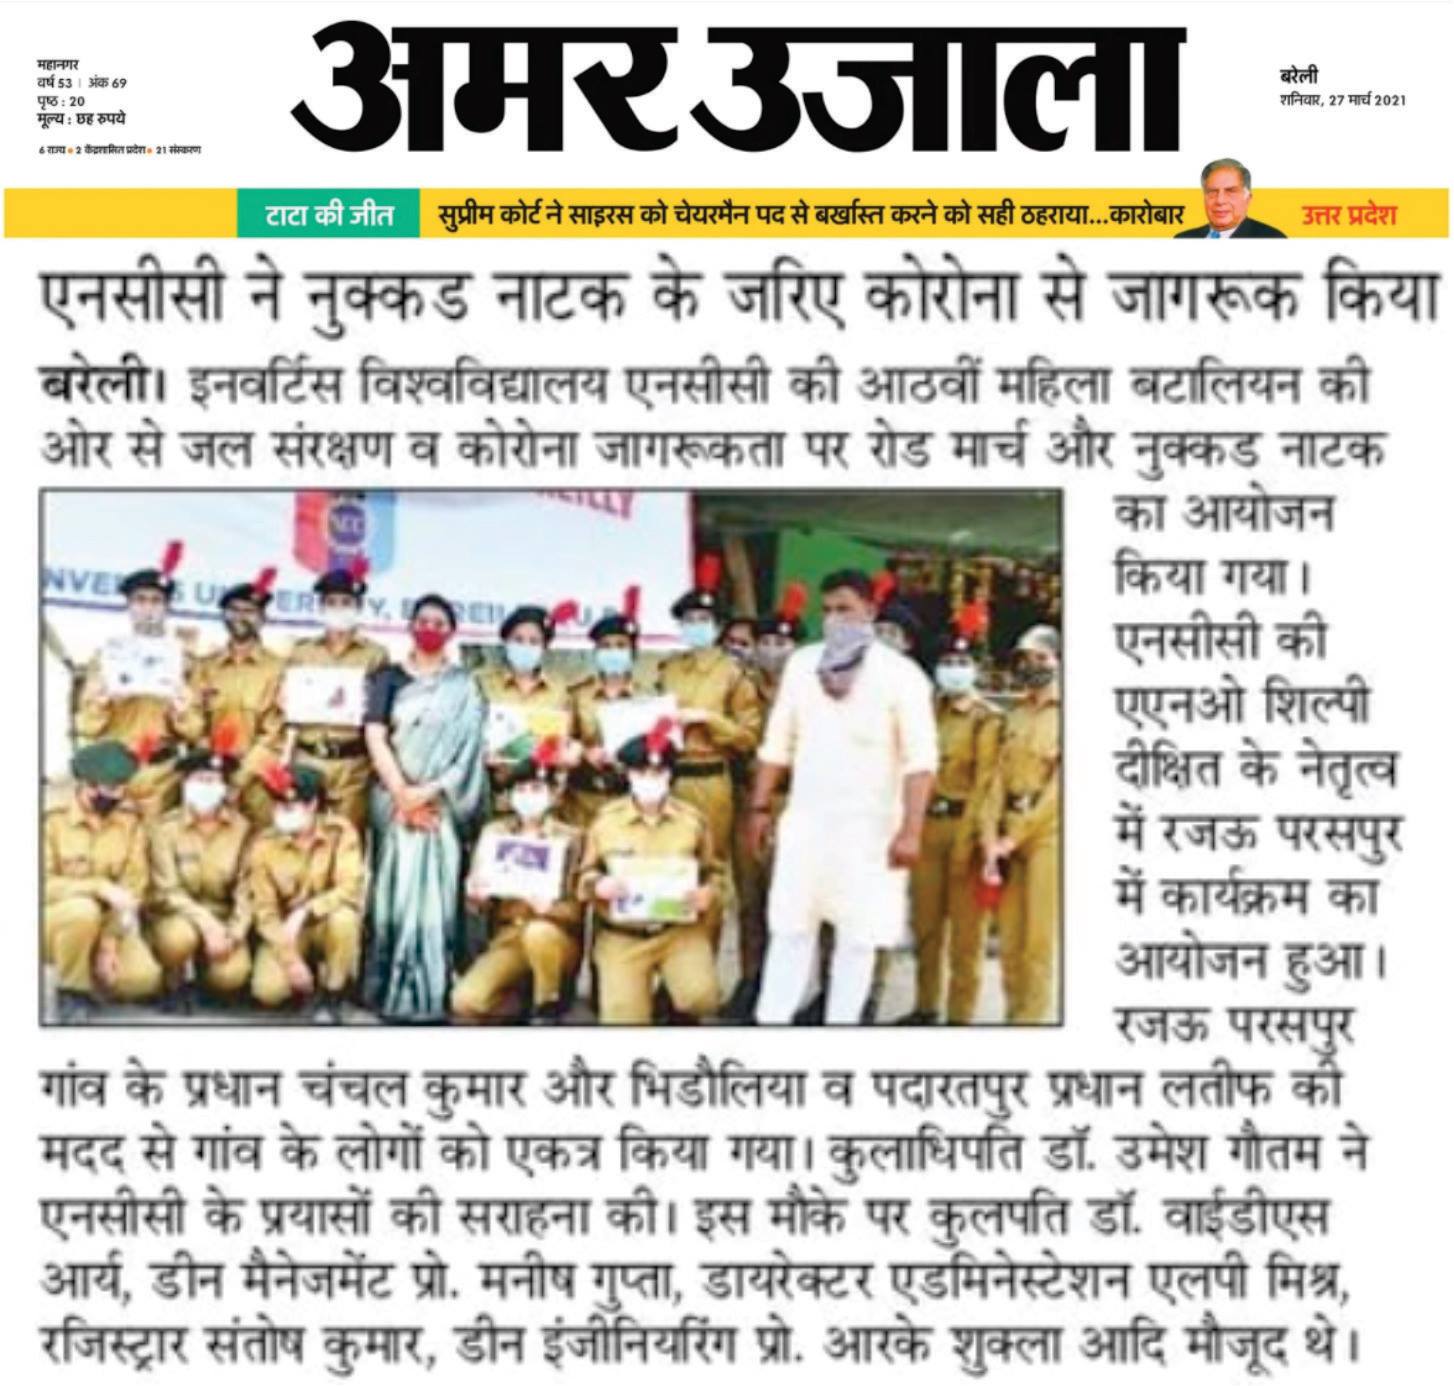 8th NCC Battalion Campaigned for social awareness about Coronavirus Vaccination